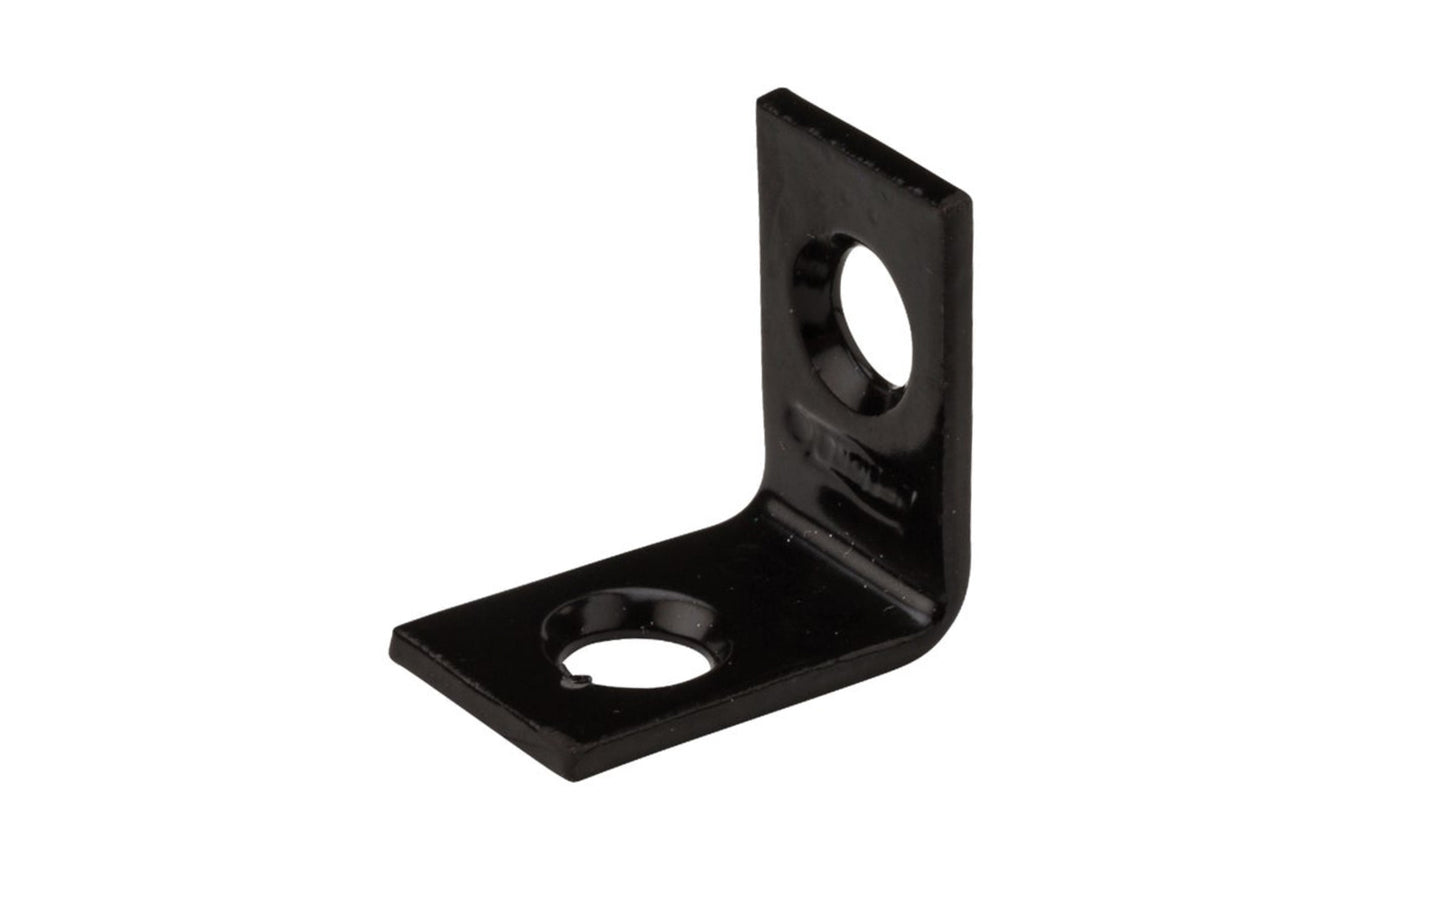 This 3/4" x 1/2" Black Finish Corner Brace is designed for furniture, countertops, shelving support, chests, cabinets. Great for repair of many items & other home, workshop, & industrial applications. Made of steel material with a black finish. Single corner brace. National Hardware Model No. N226-478. 886780014525